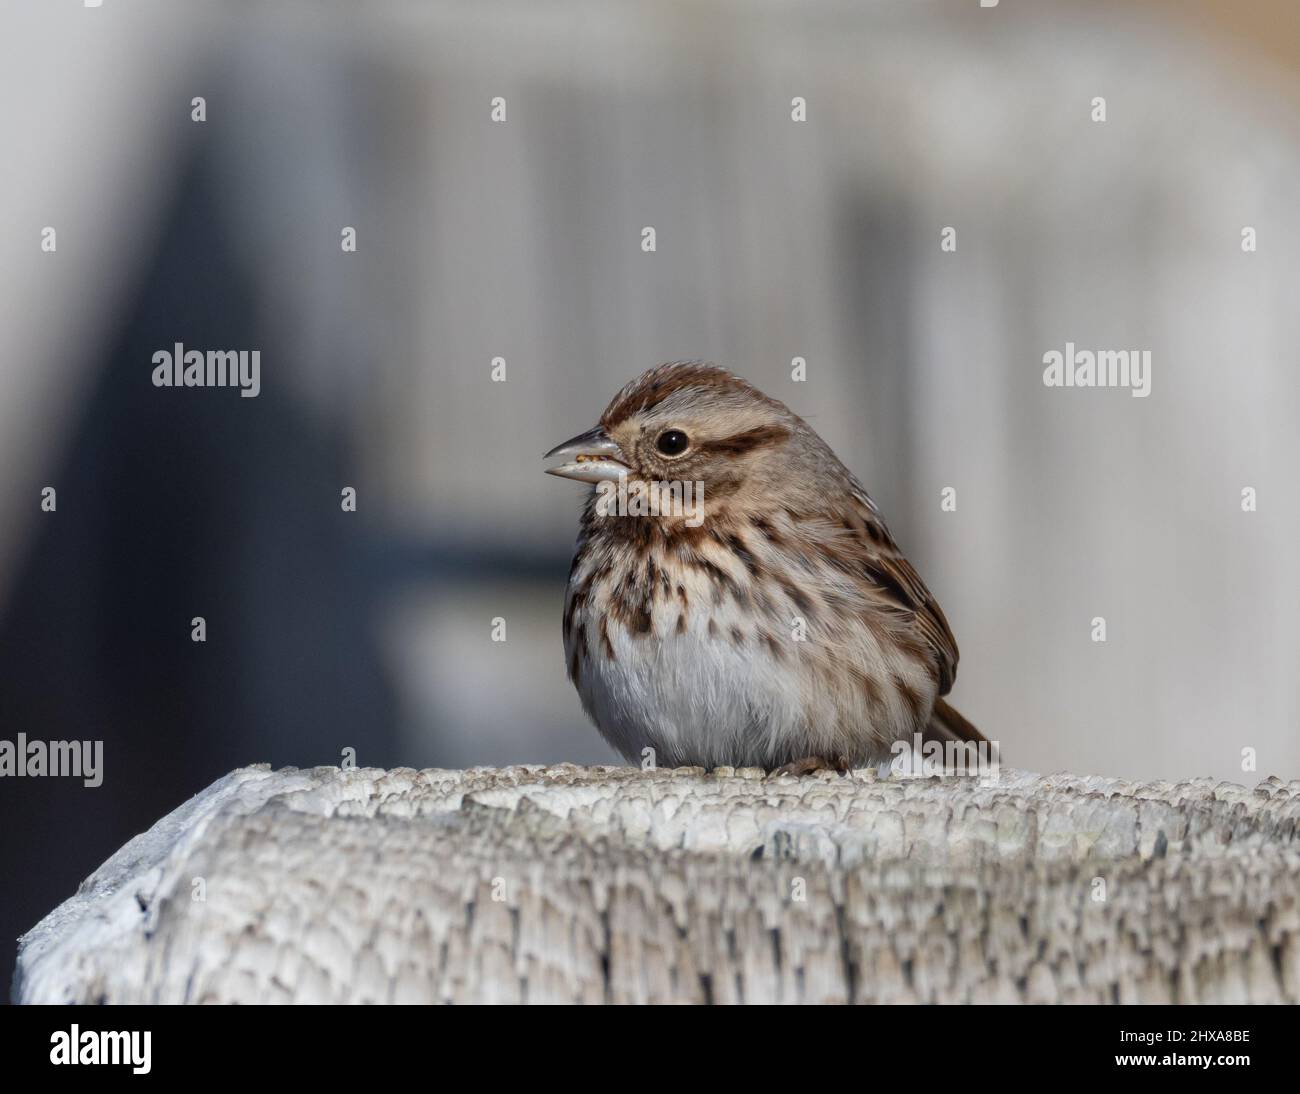 Perched American Song Sparrow Stock Photo